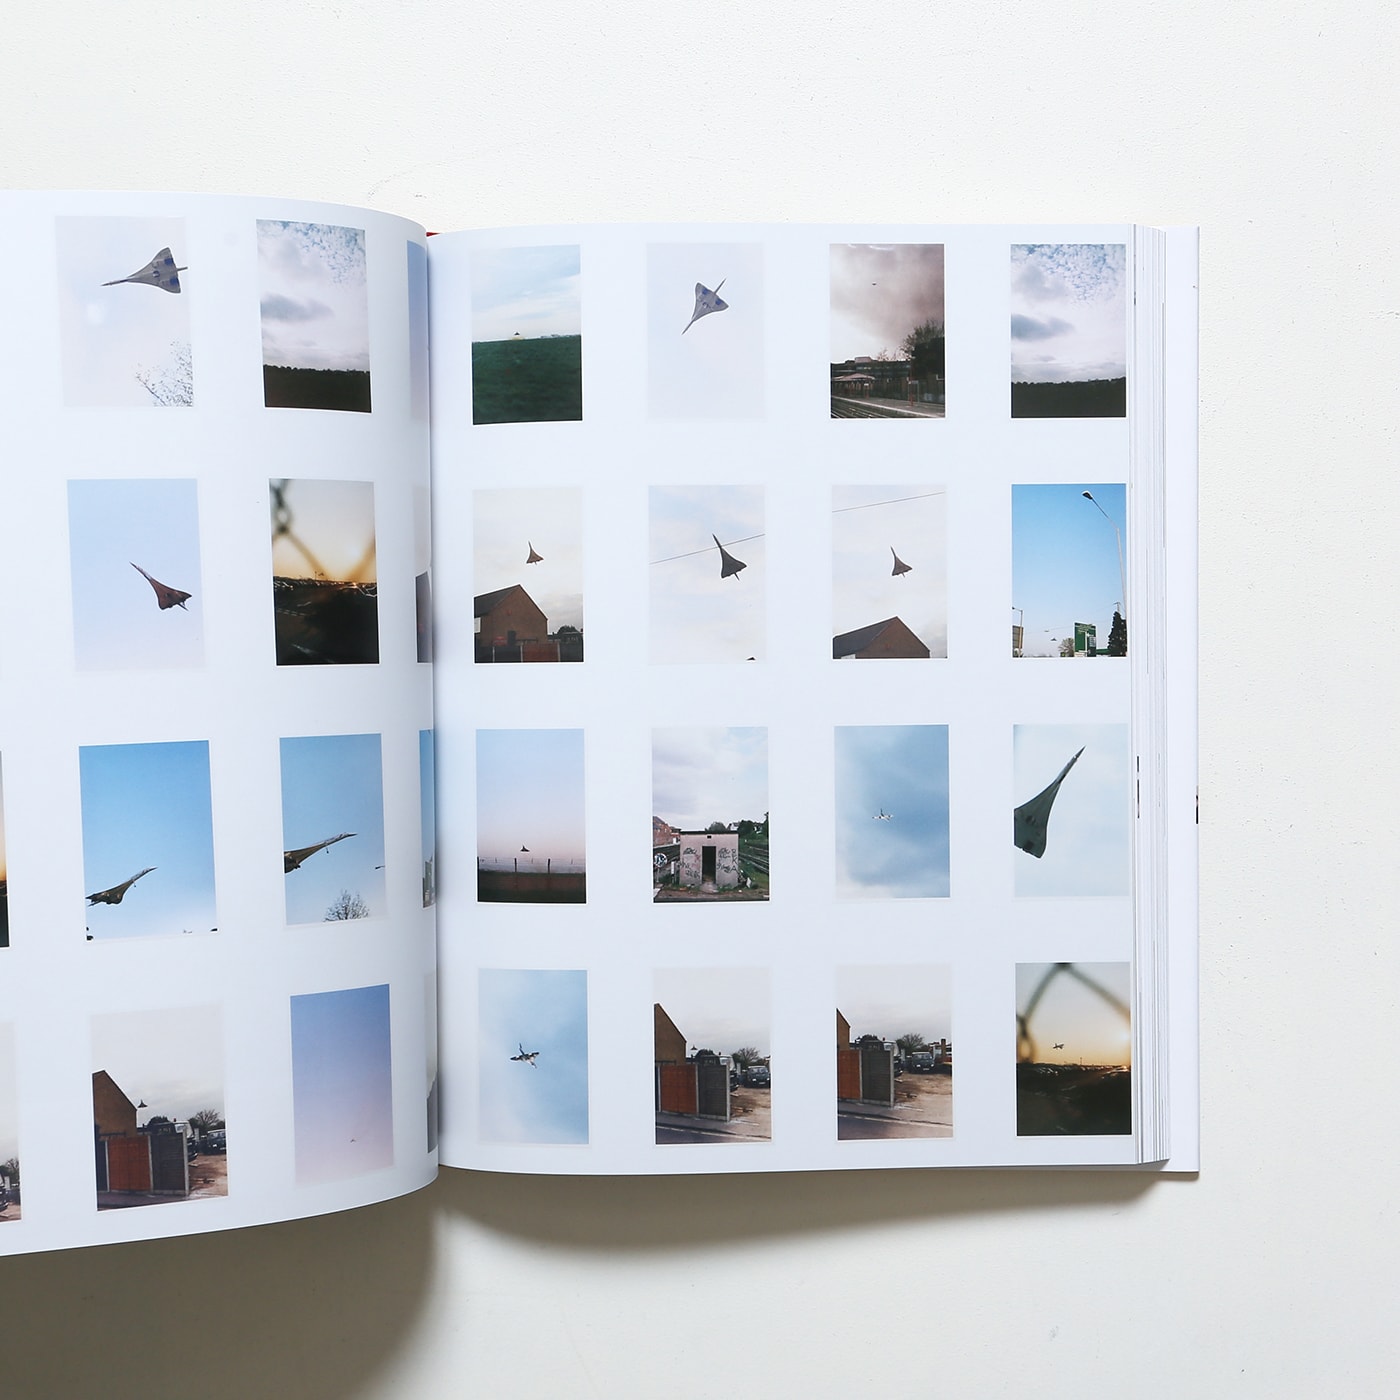 Wolfgang Tillmans: To Look without Fear